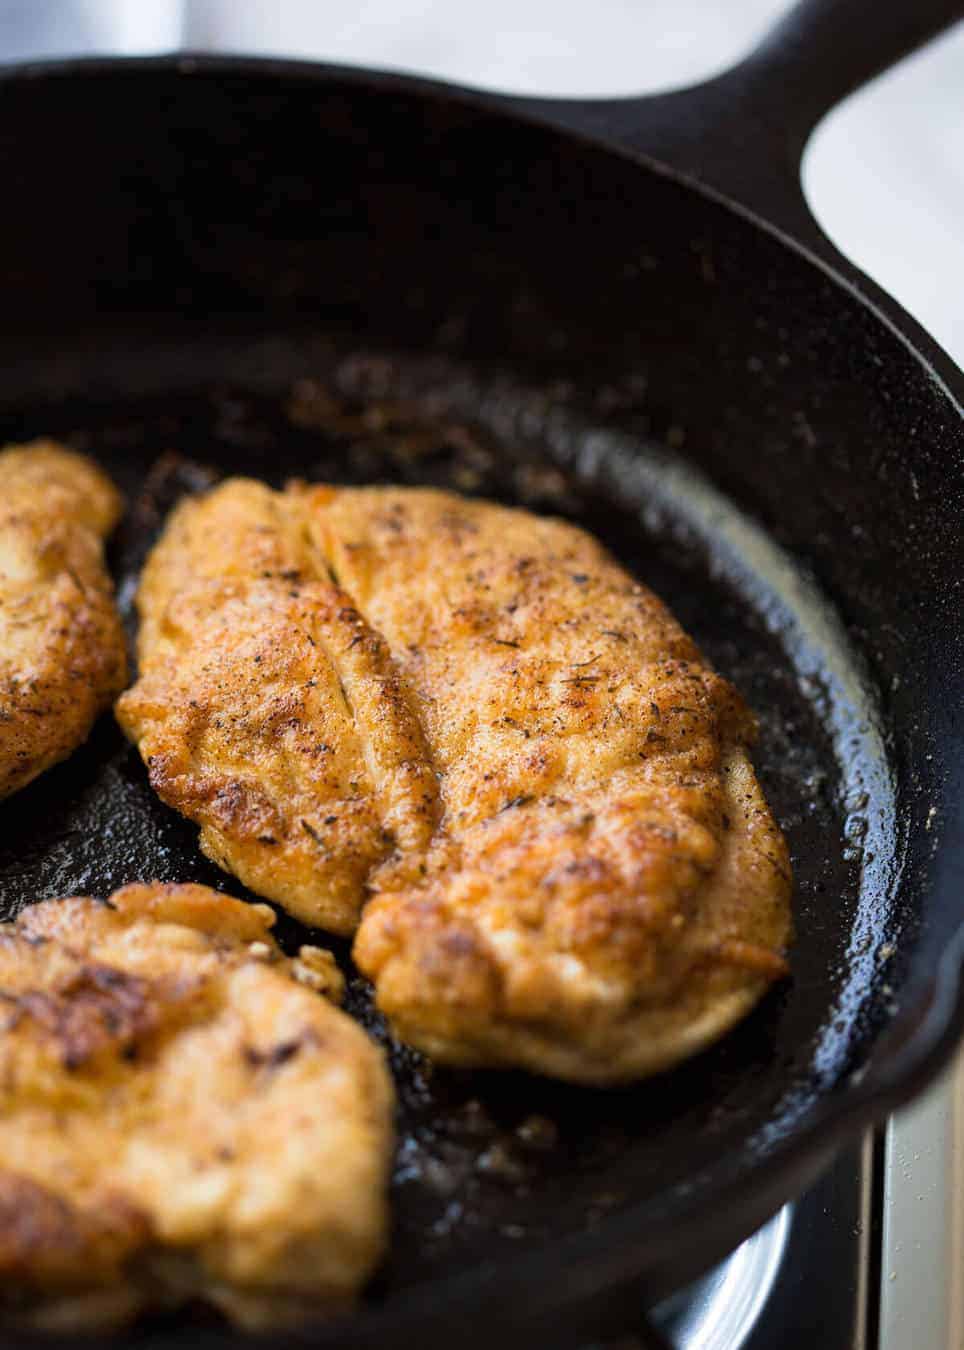 Super tasty, quick Chicken Burger recipe made with chicken breast. It's all in the seasoning! Great for grilling too. recipetineats.com